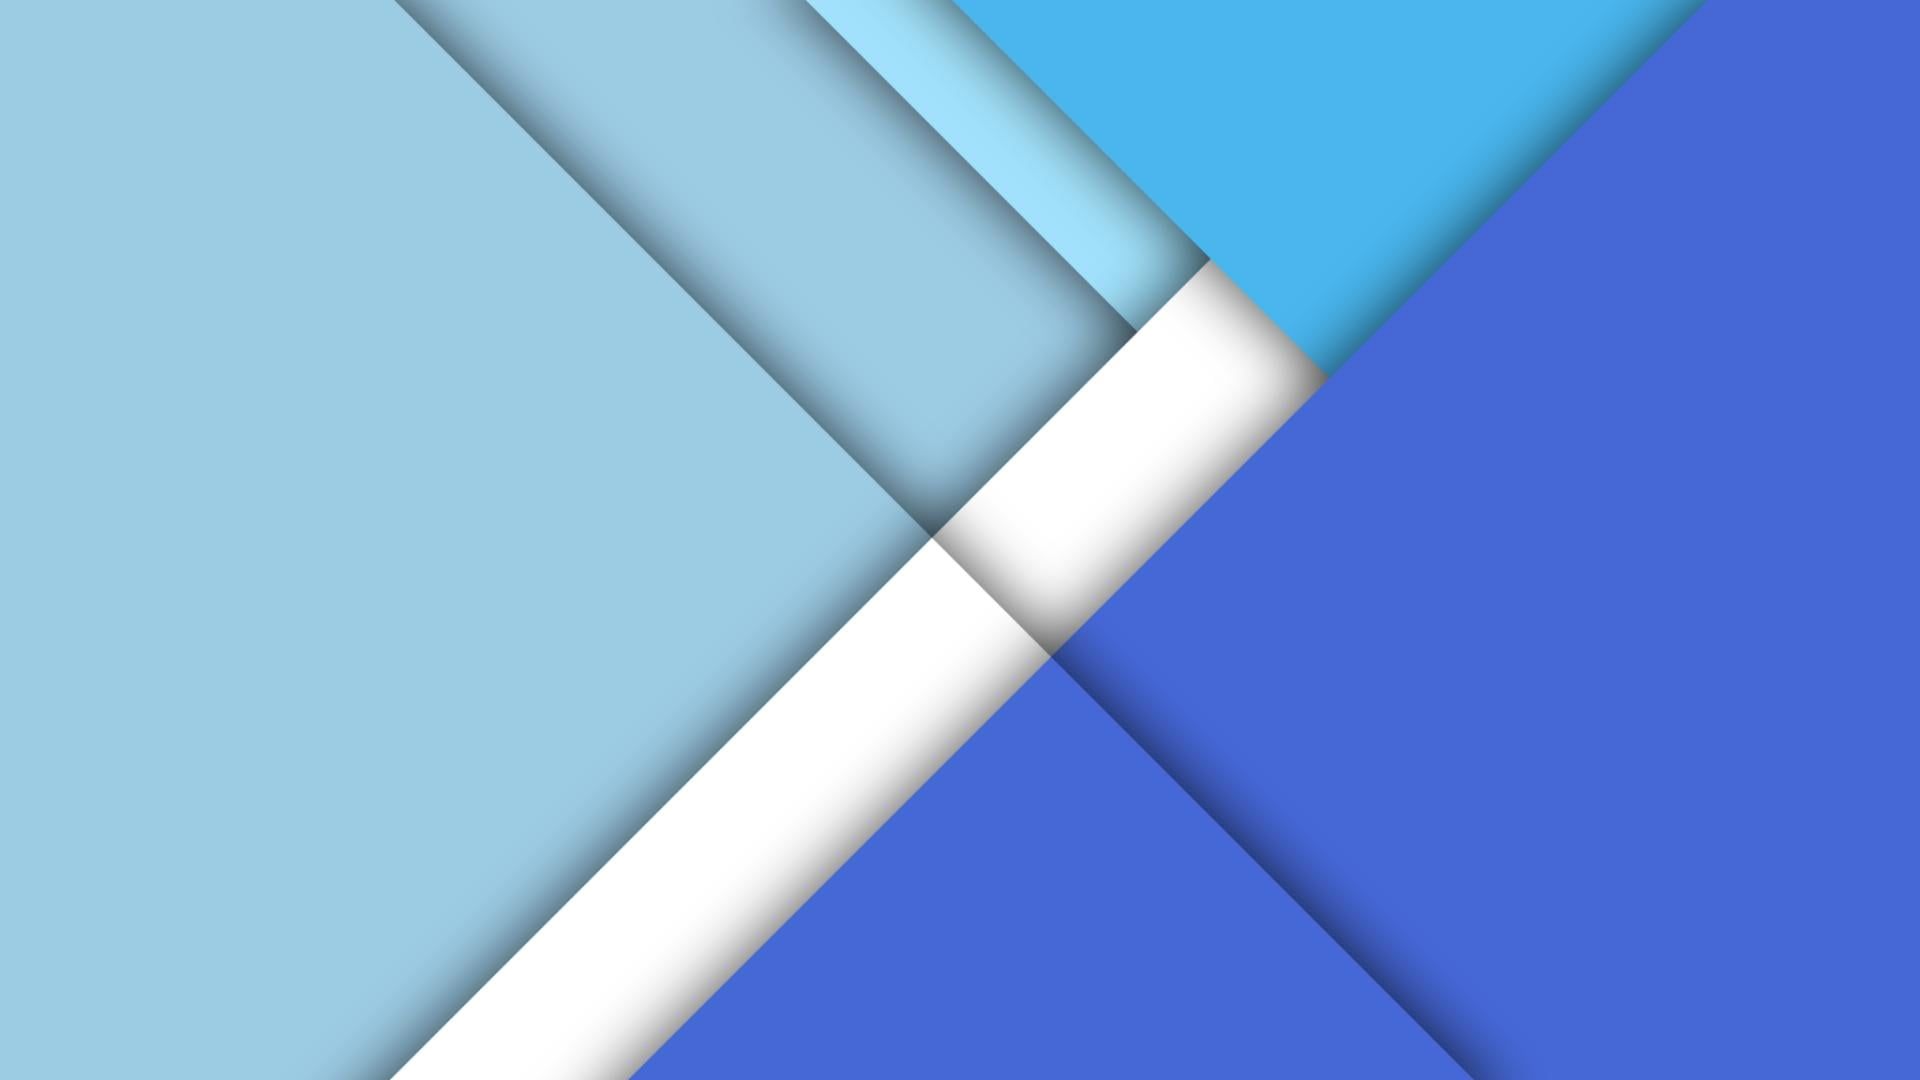 Blue Material Wallpapers